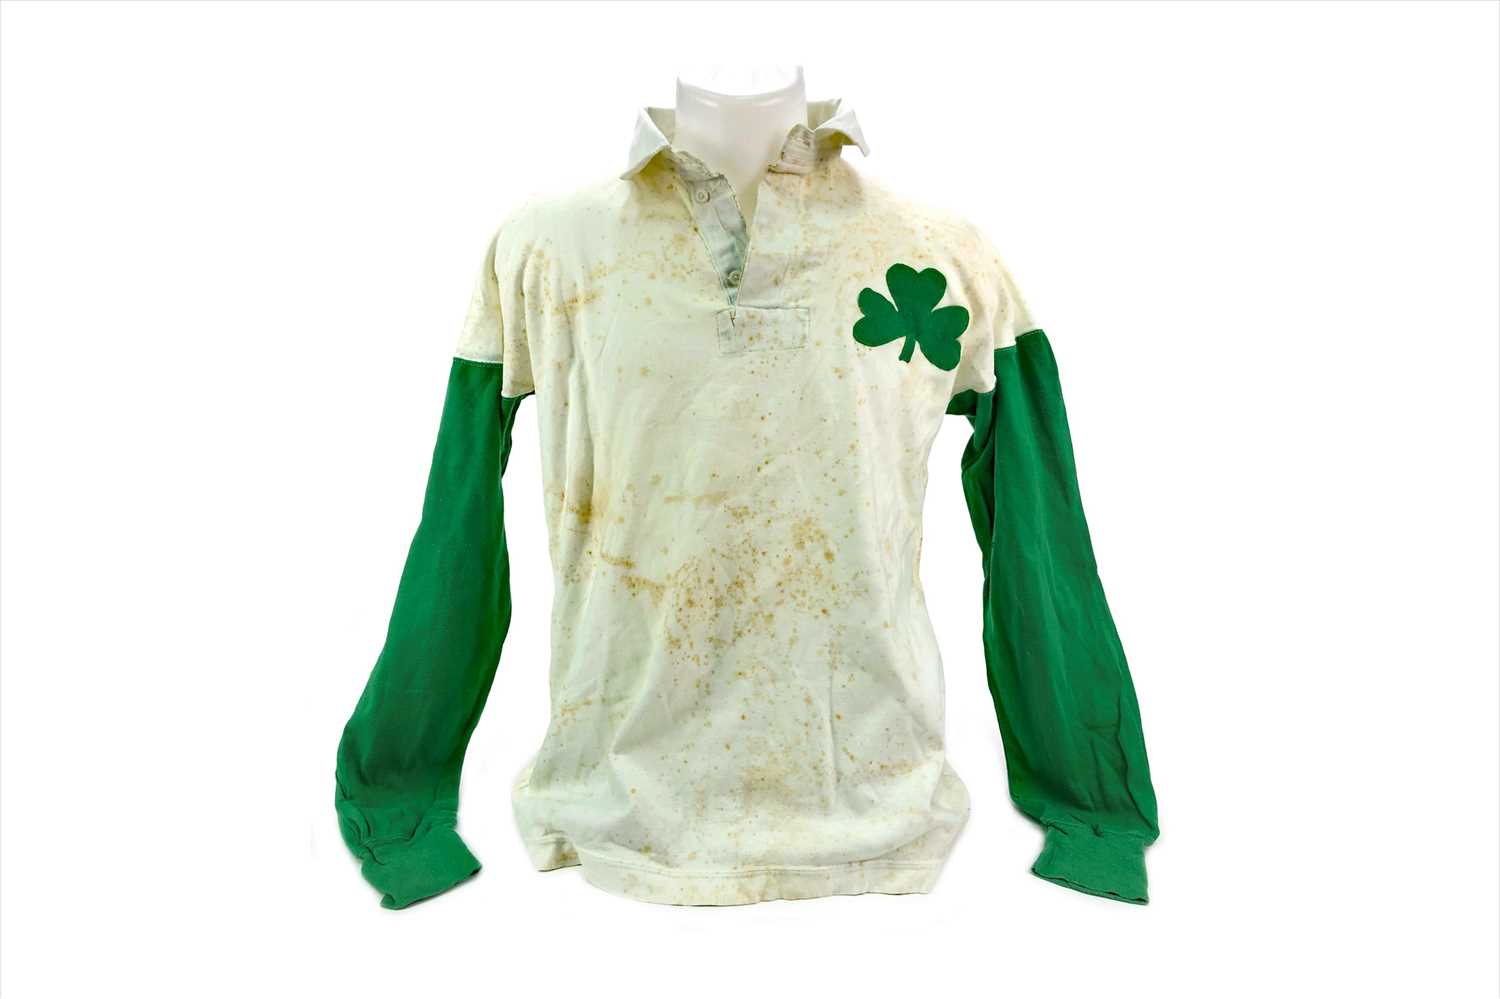 Lot 1910 - STEVIE CHALMERS OF CELTIC F.C. - HIS CELTIC 'AWAY' JERSEY